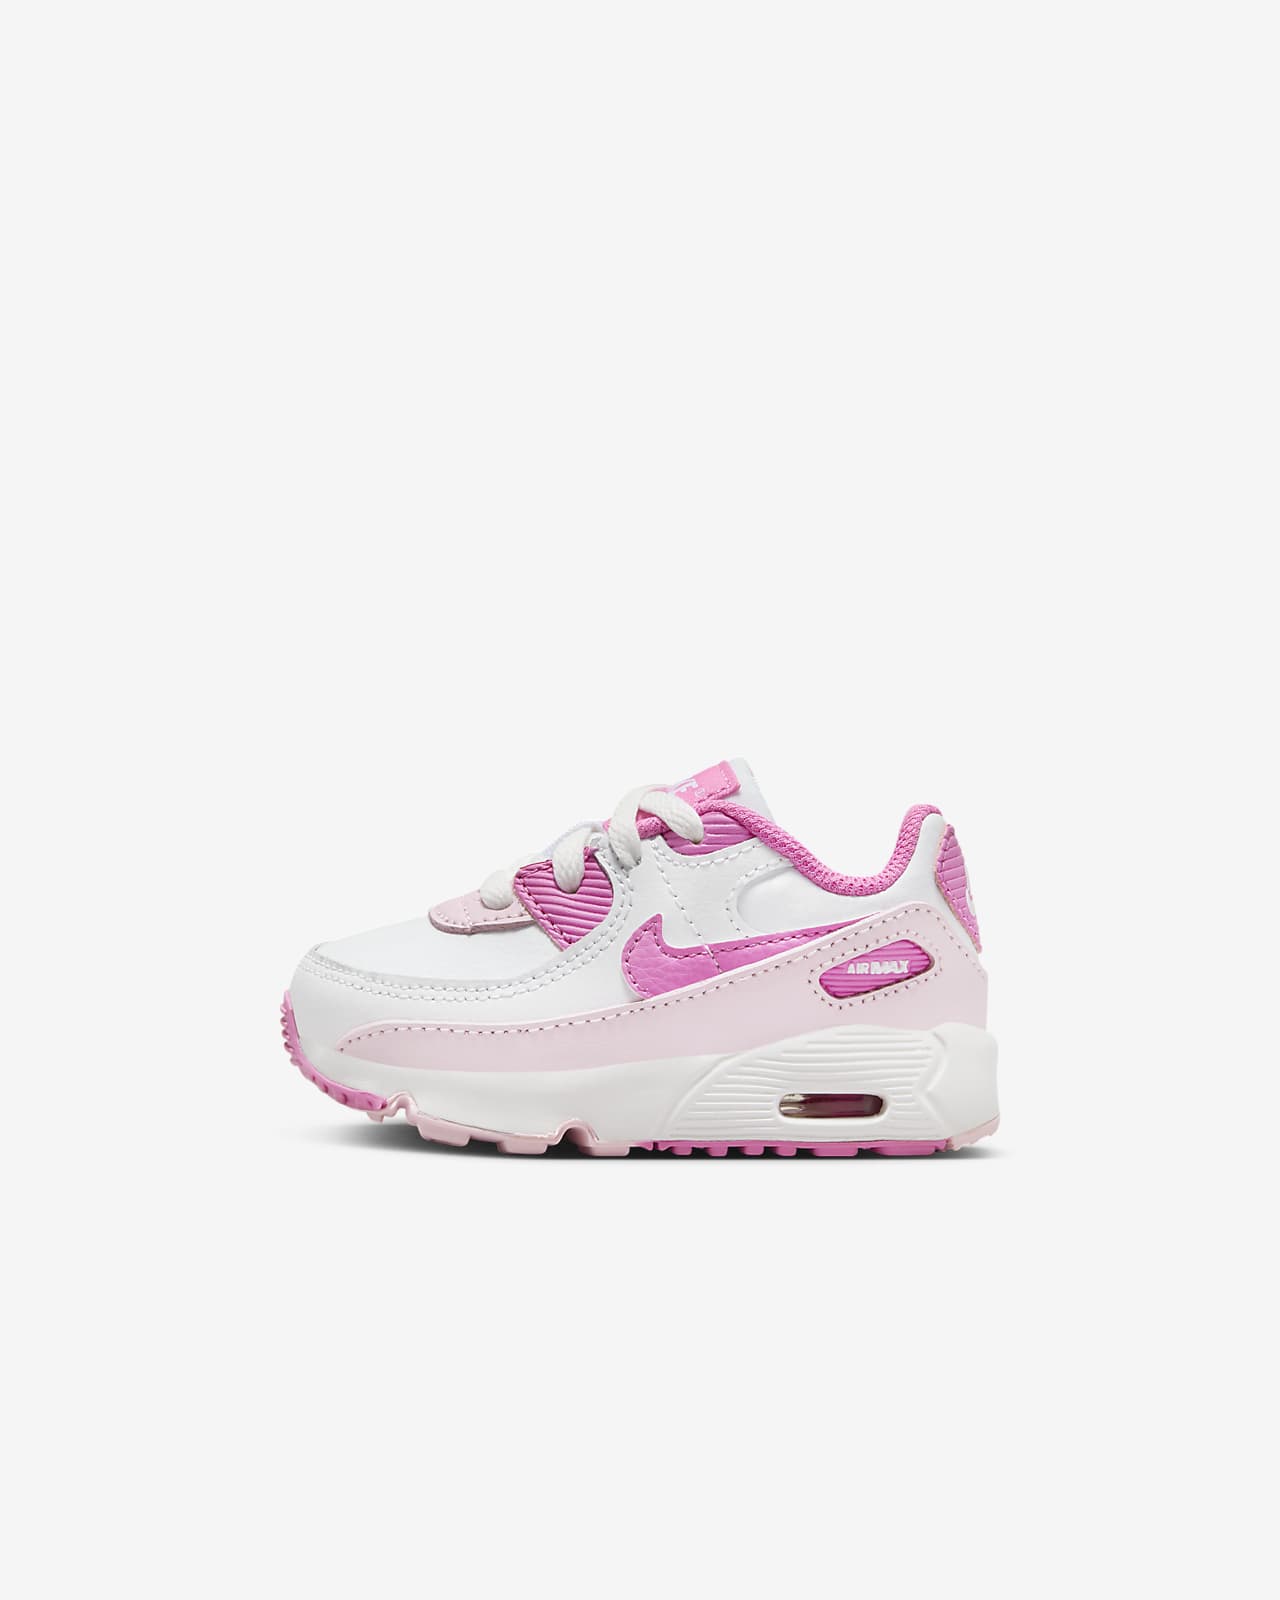 Nike Air Max 90 Baby/Toddler Shoes